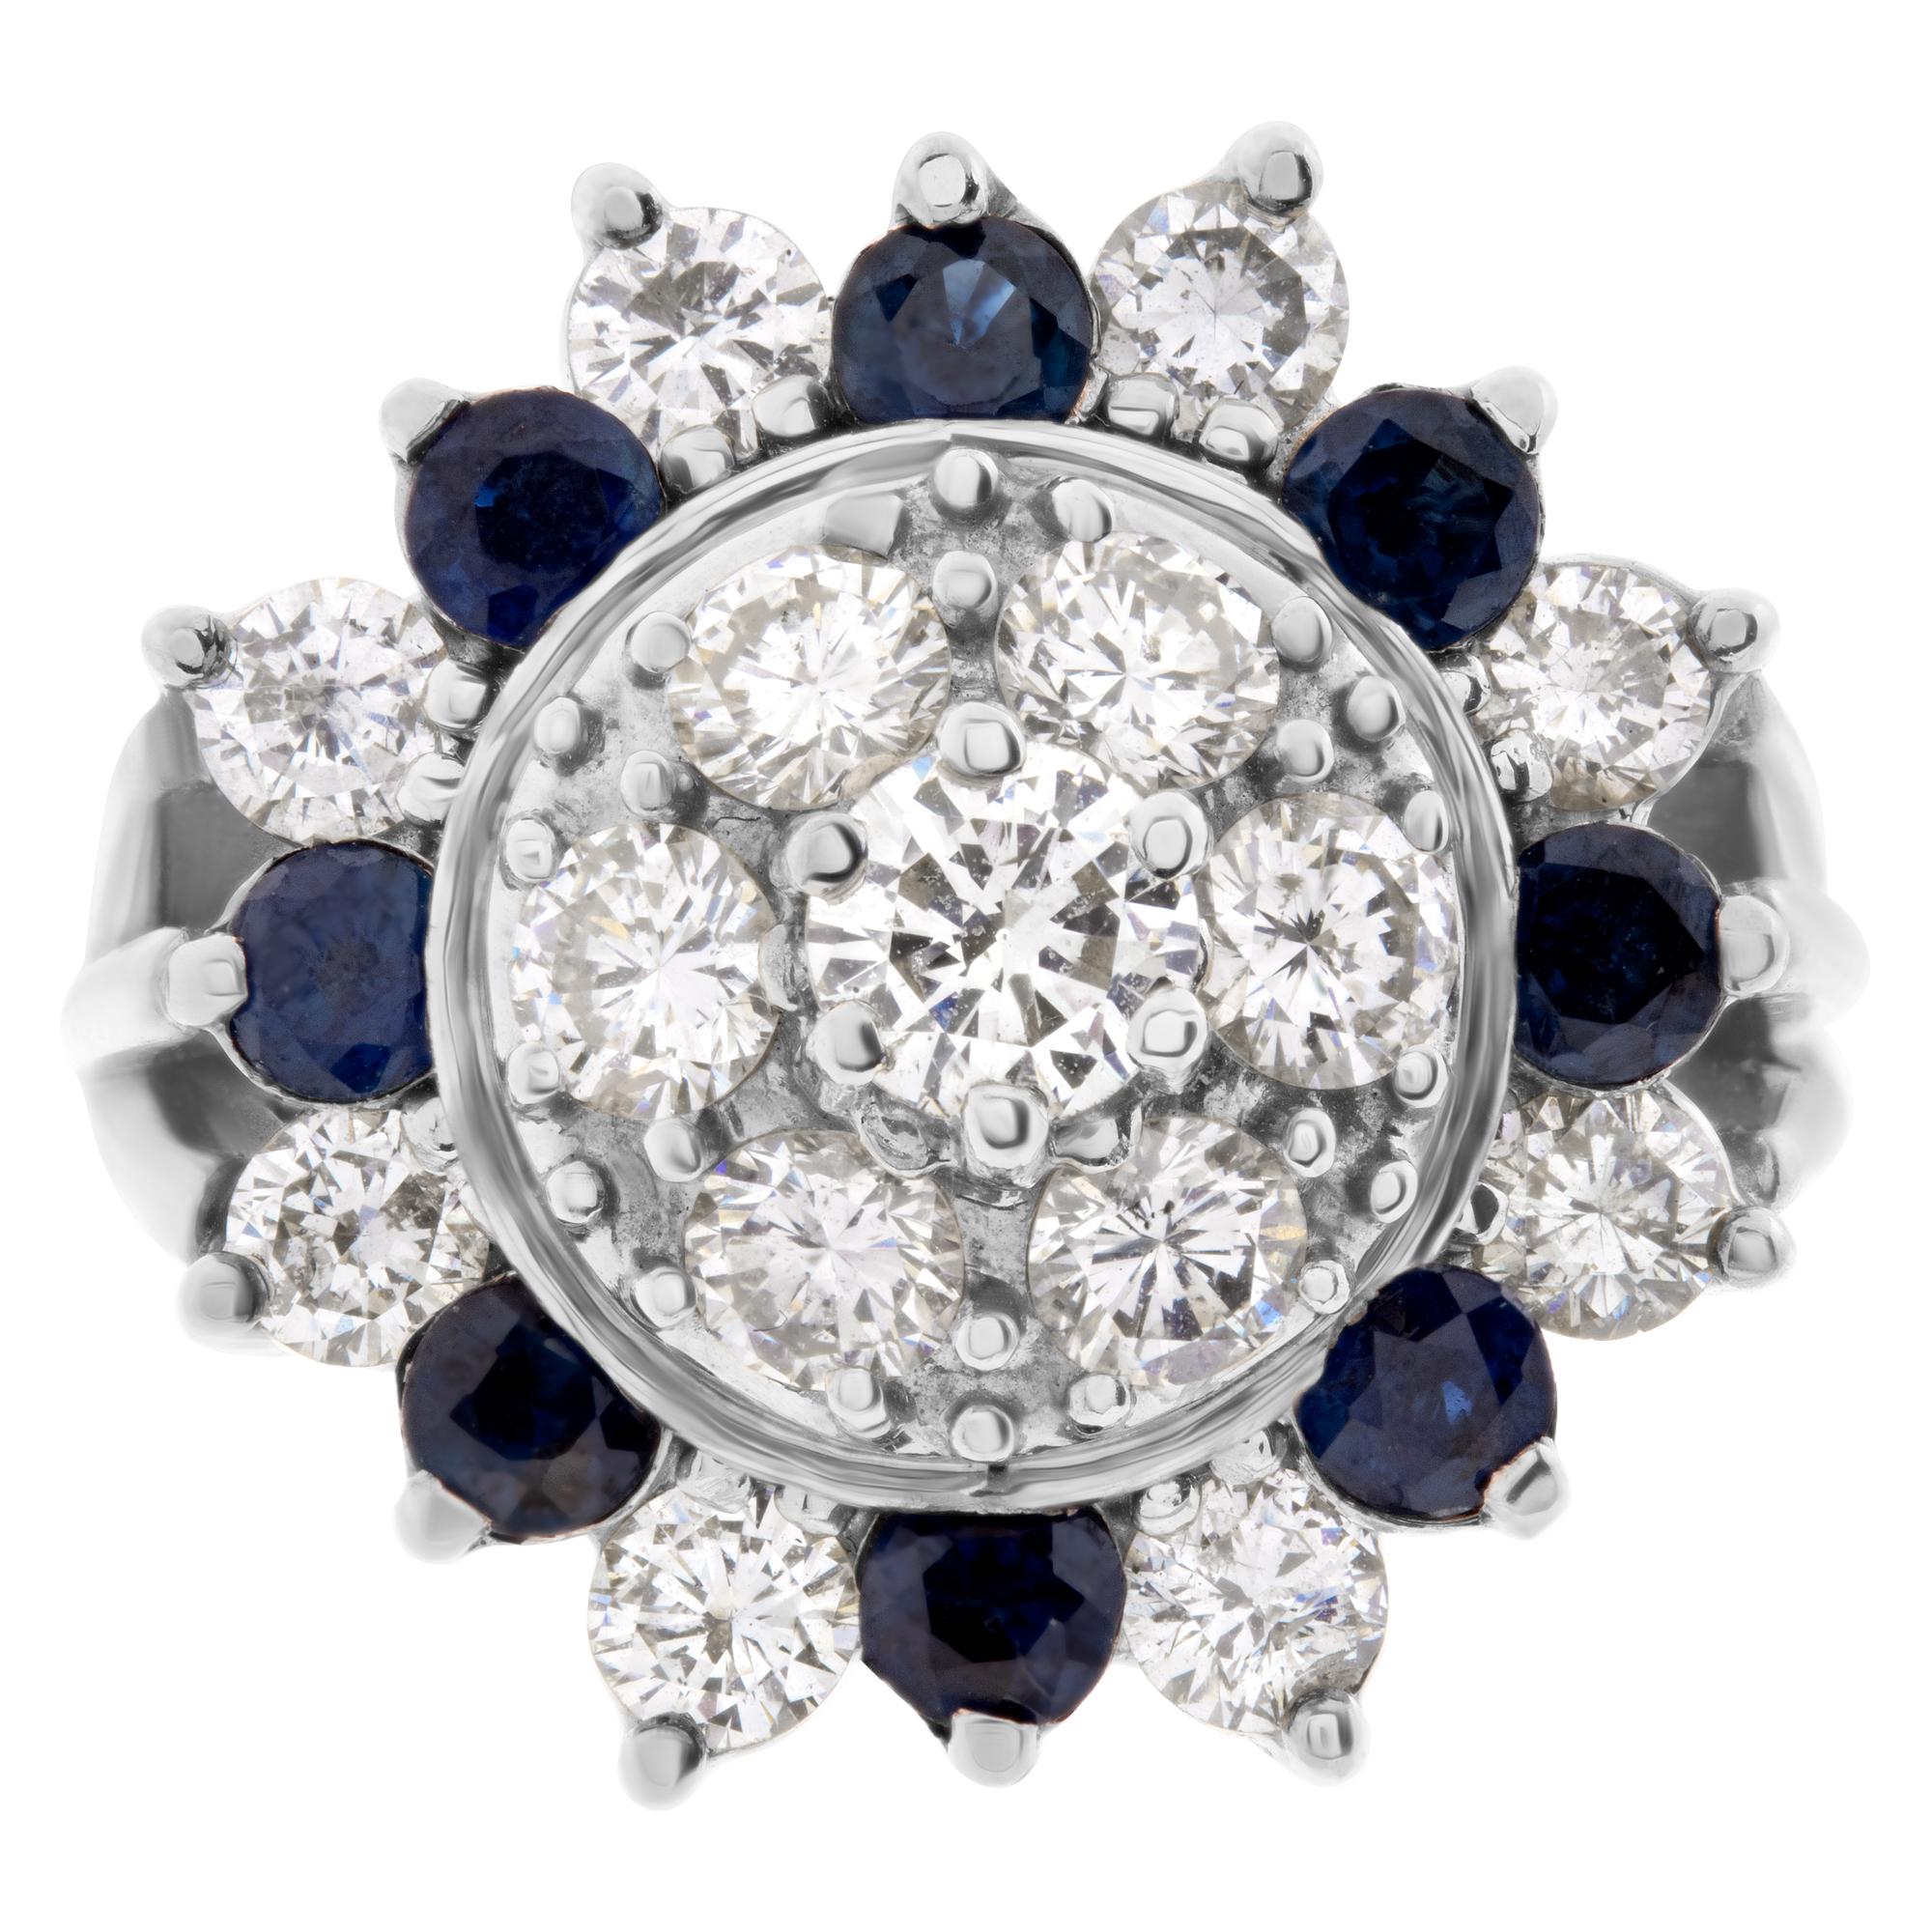 Star cluster ring with approx. 1.50 carats in diamonds and 0.50 cts in blue sapphires set in 14k white gold (SI clarity). Size 6.5  This Diamond ring is currently size 6.5 and some items can be sized up or down, please ask! It weighs 6.4